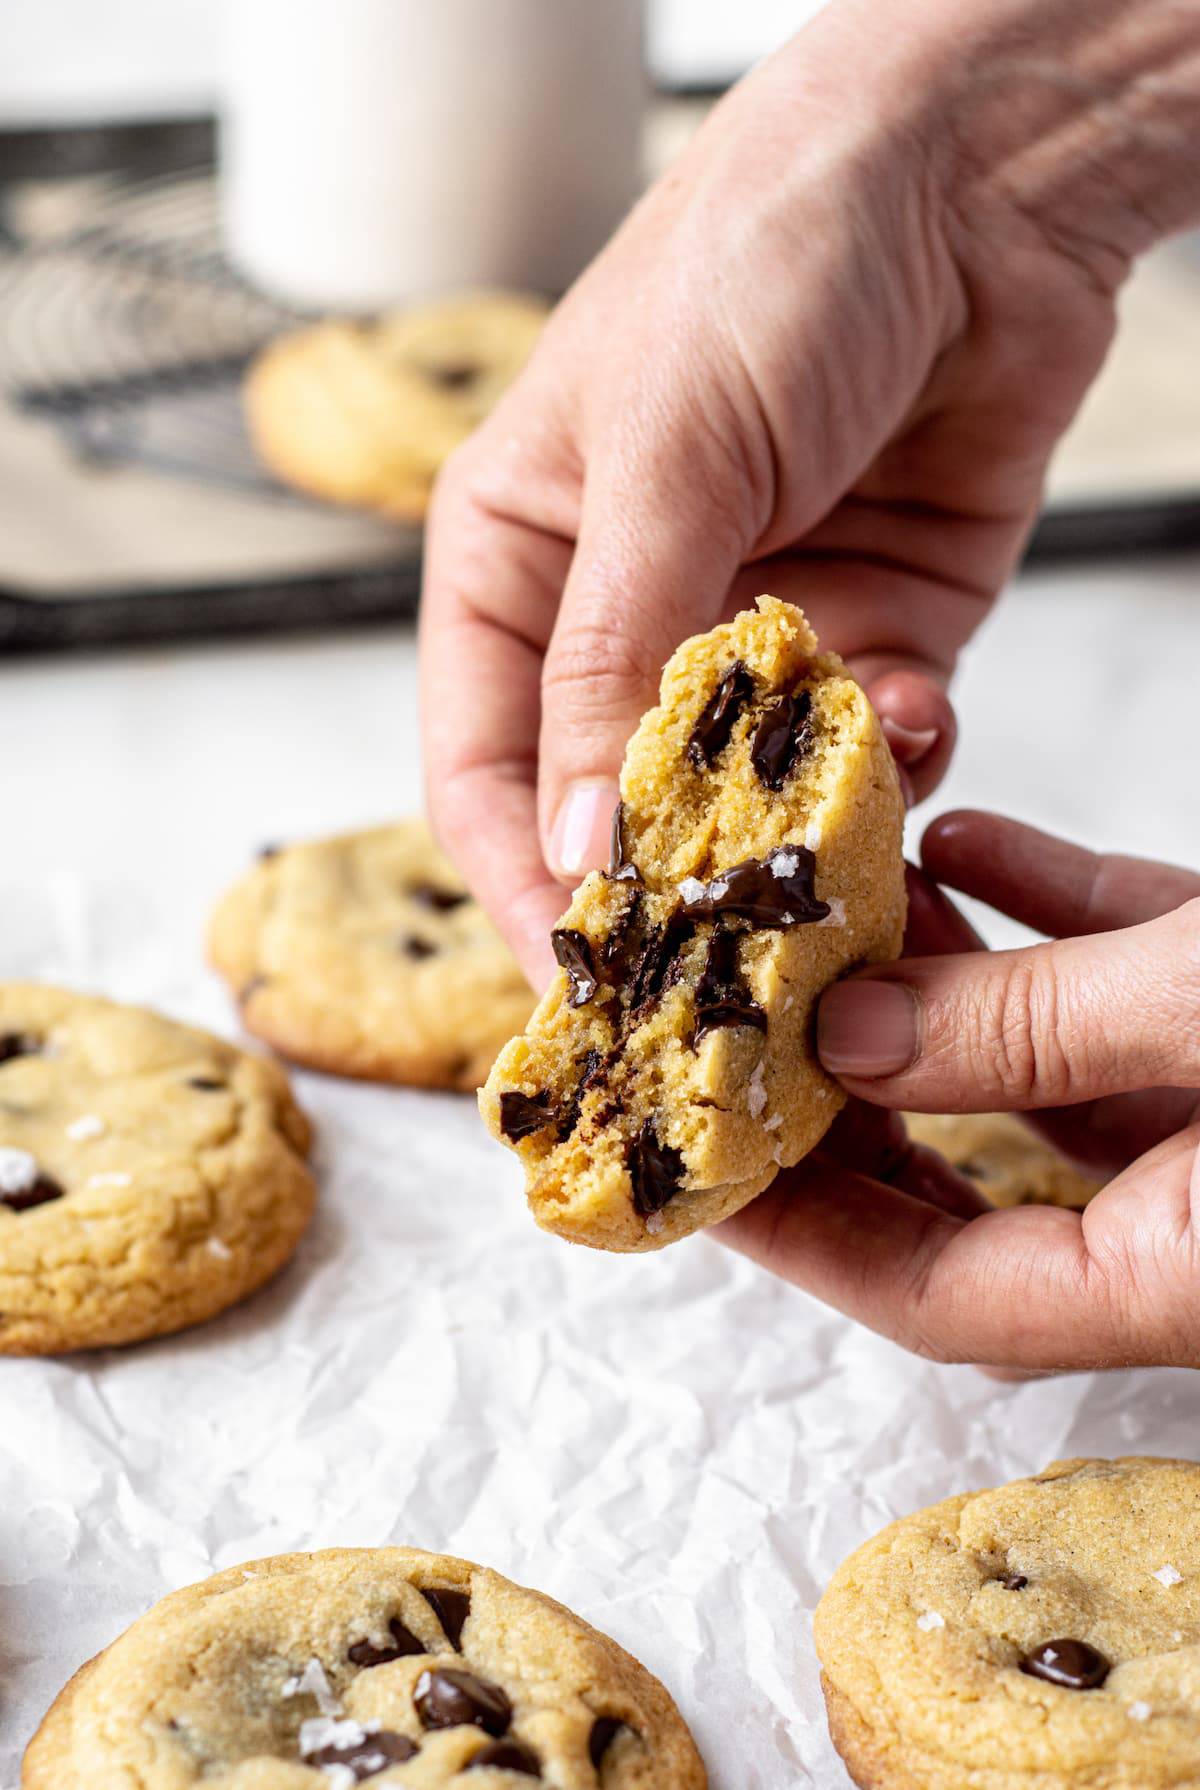 a hand breaking open a chocolate chip cookie